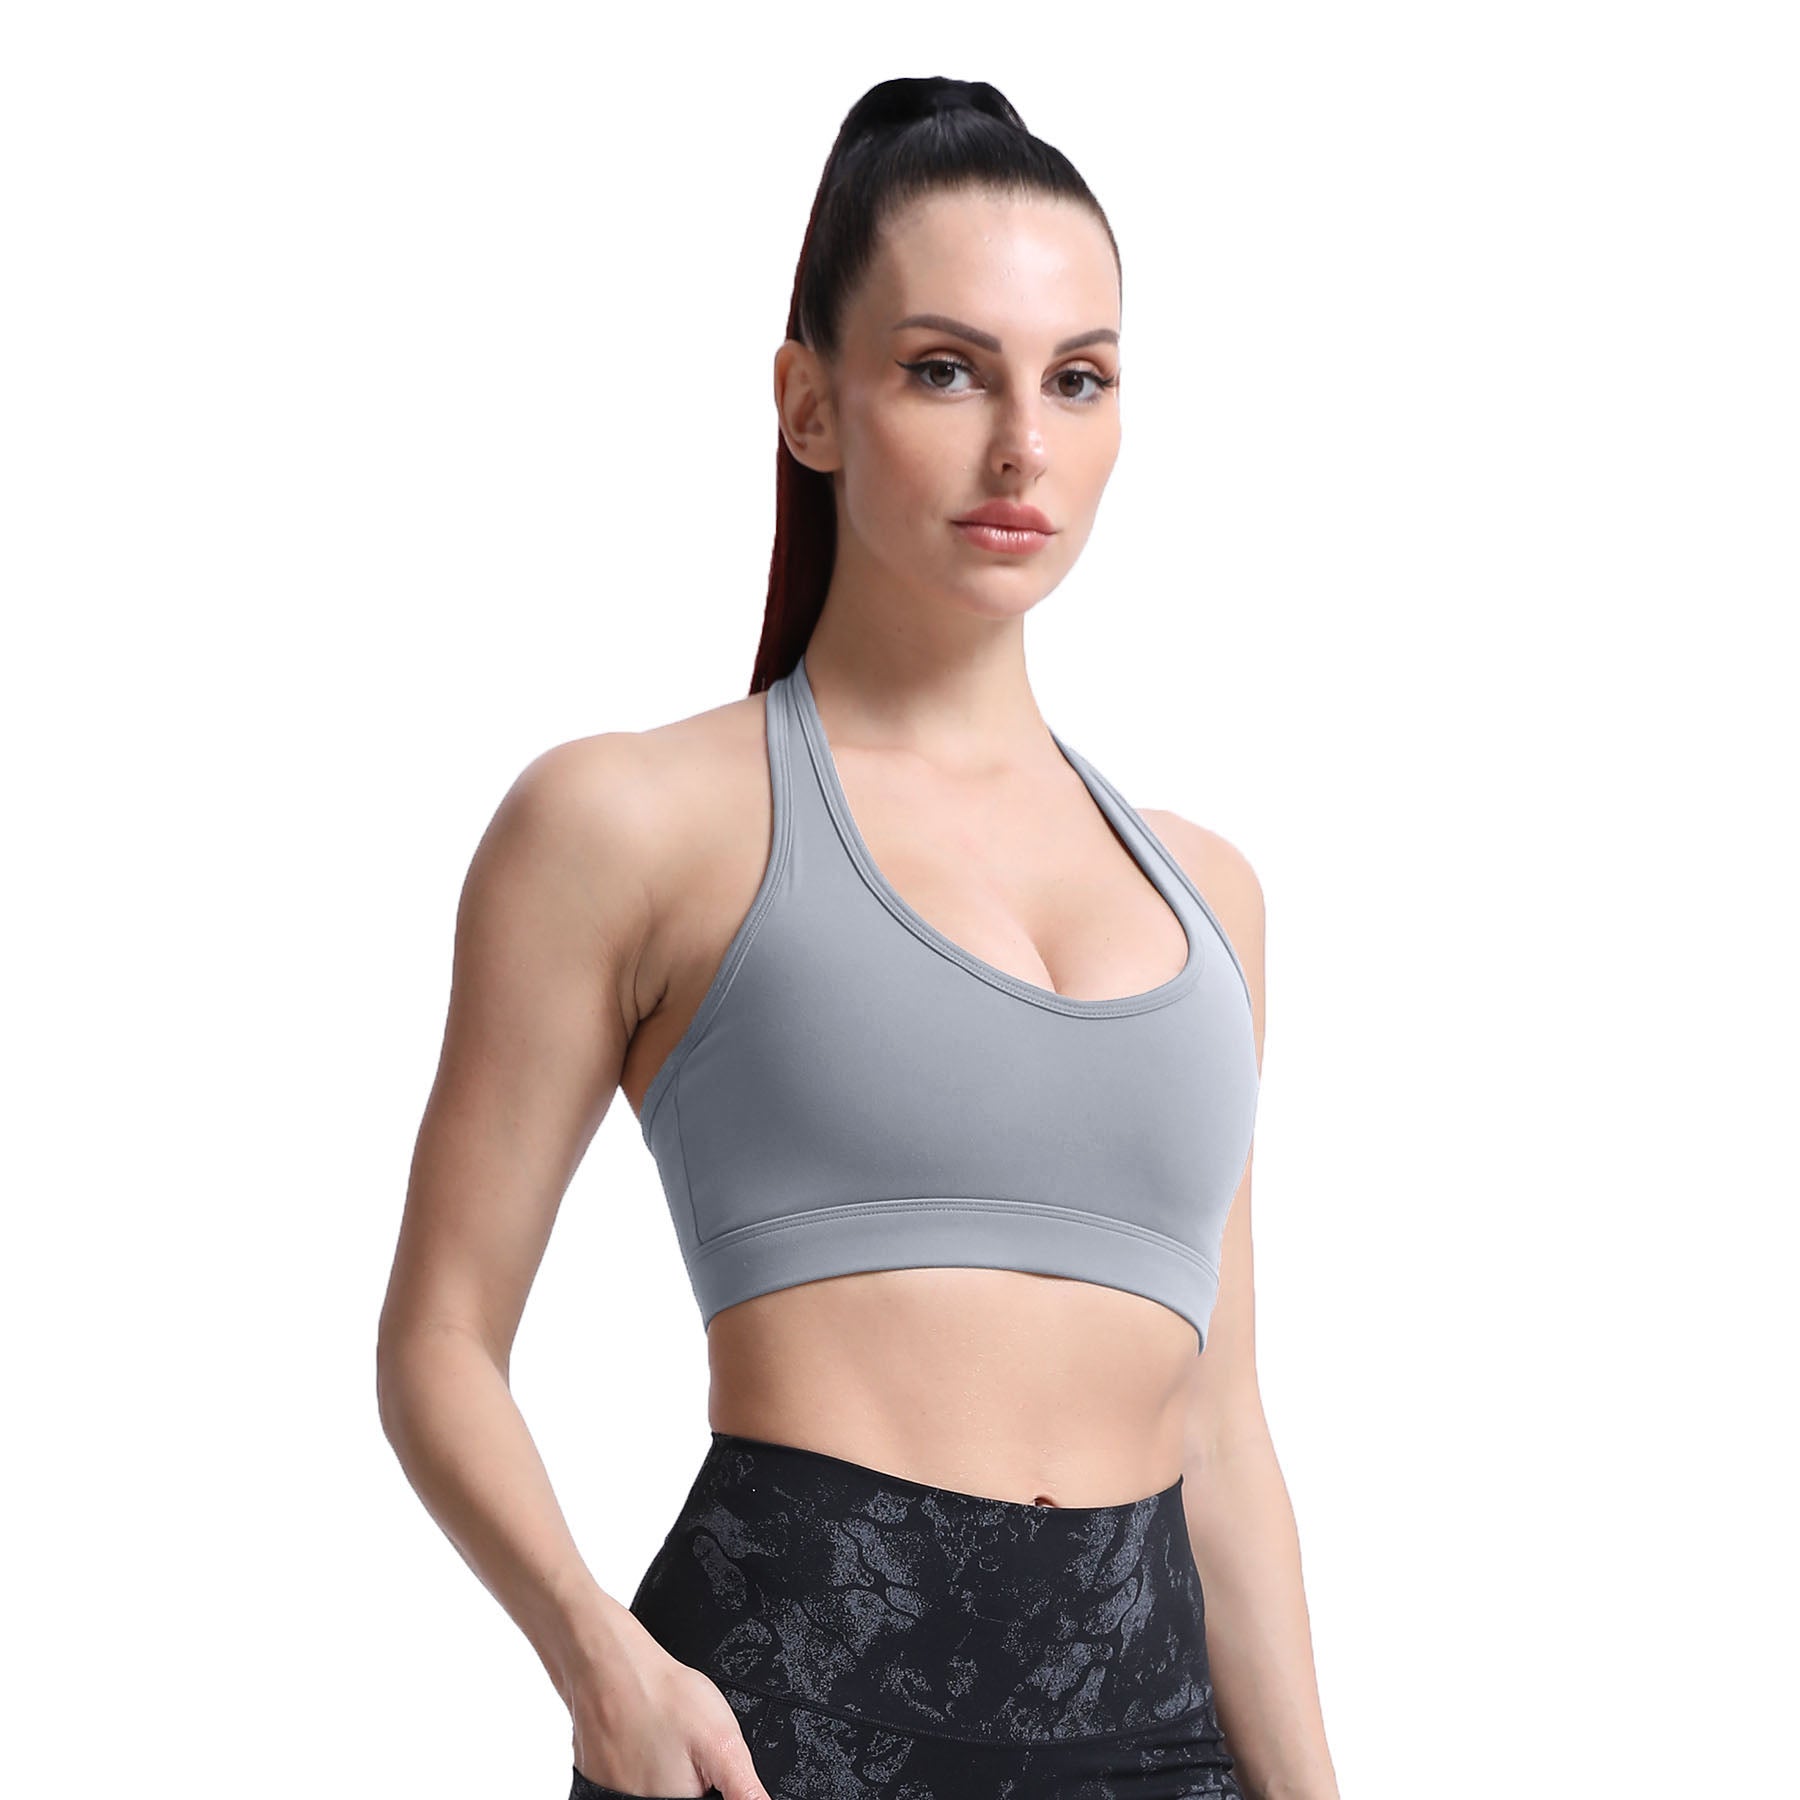 Aoxjox Women's Workout Sports Bras Fitness Adjusted Backless